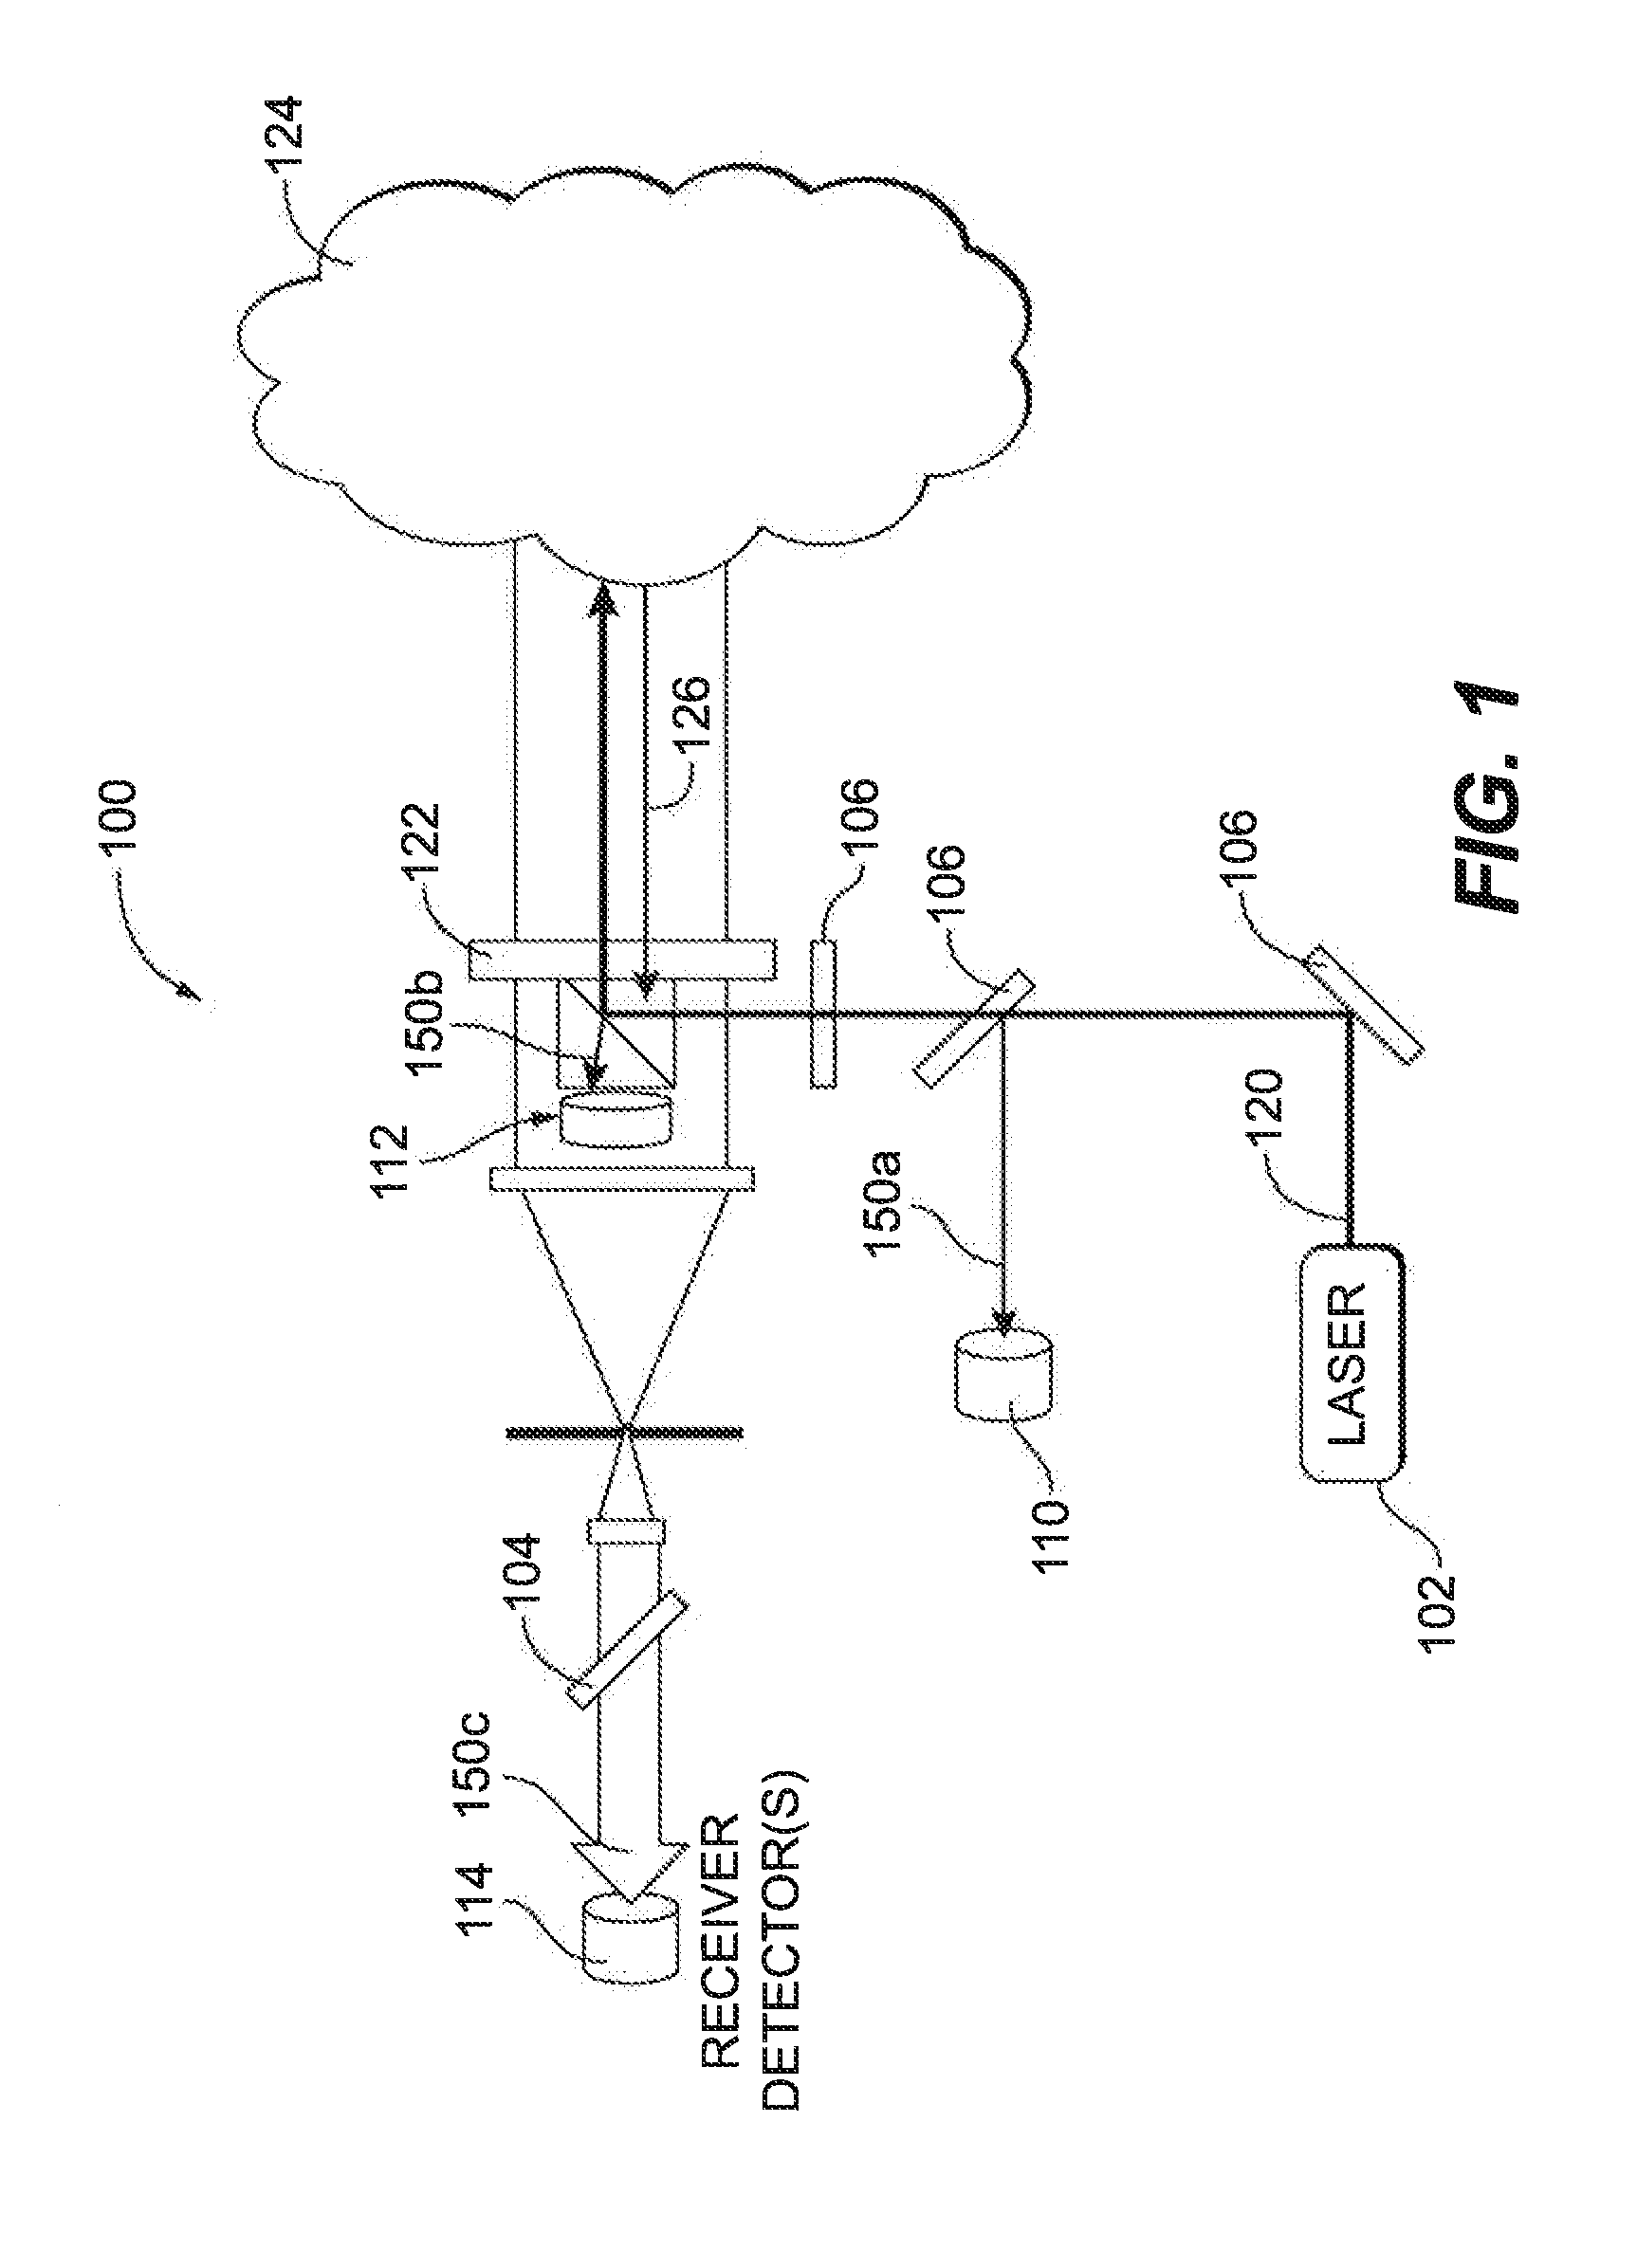 System and method for monitoring optical subsystem performance in cloud lidar systems